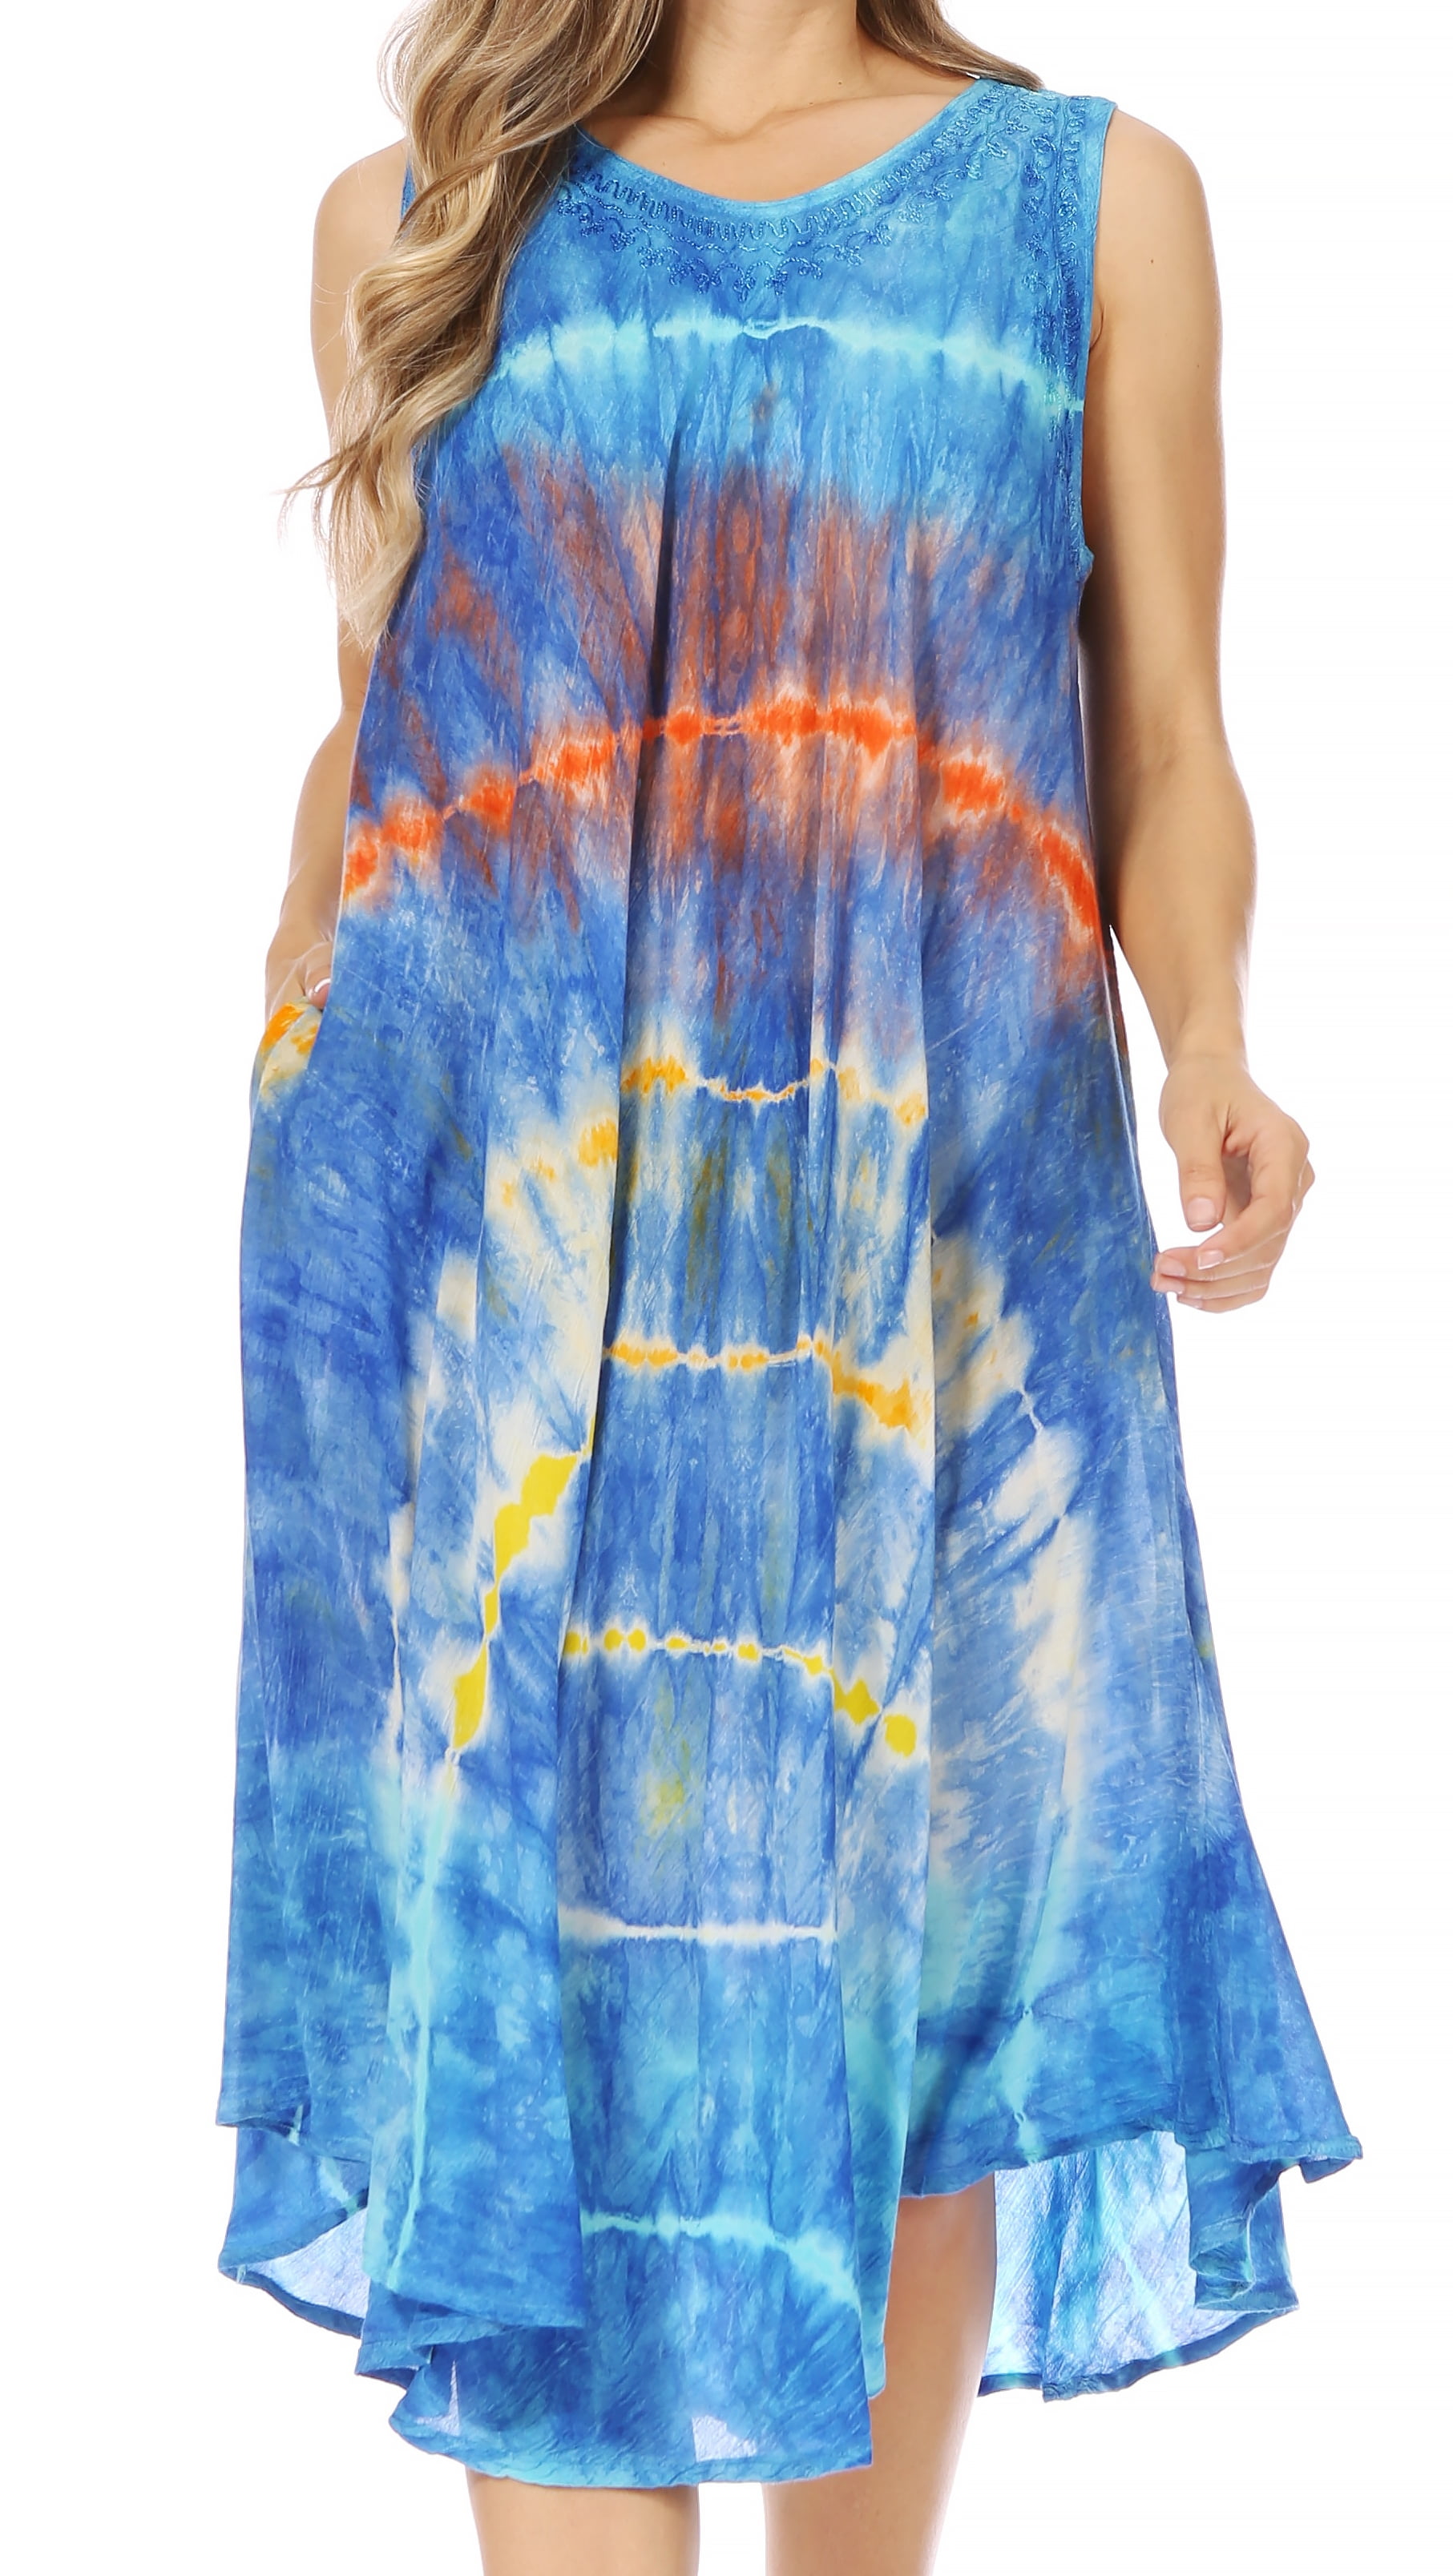 Sakkas Nora Sleeveless Embroidered Short Tie Dye Caftan Dress / Cover Up -  Blue - One Size 